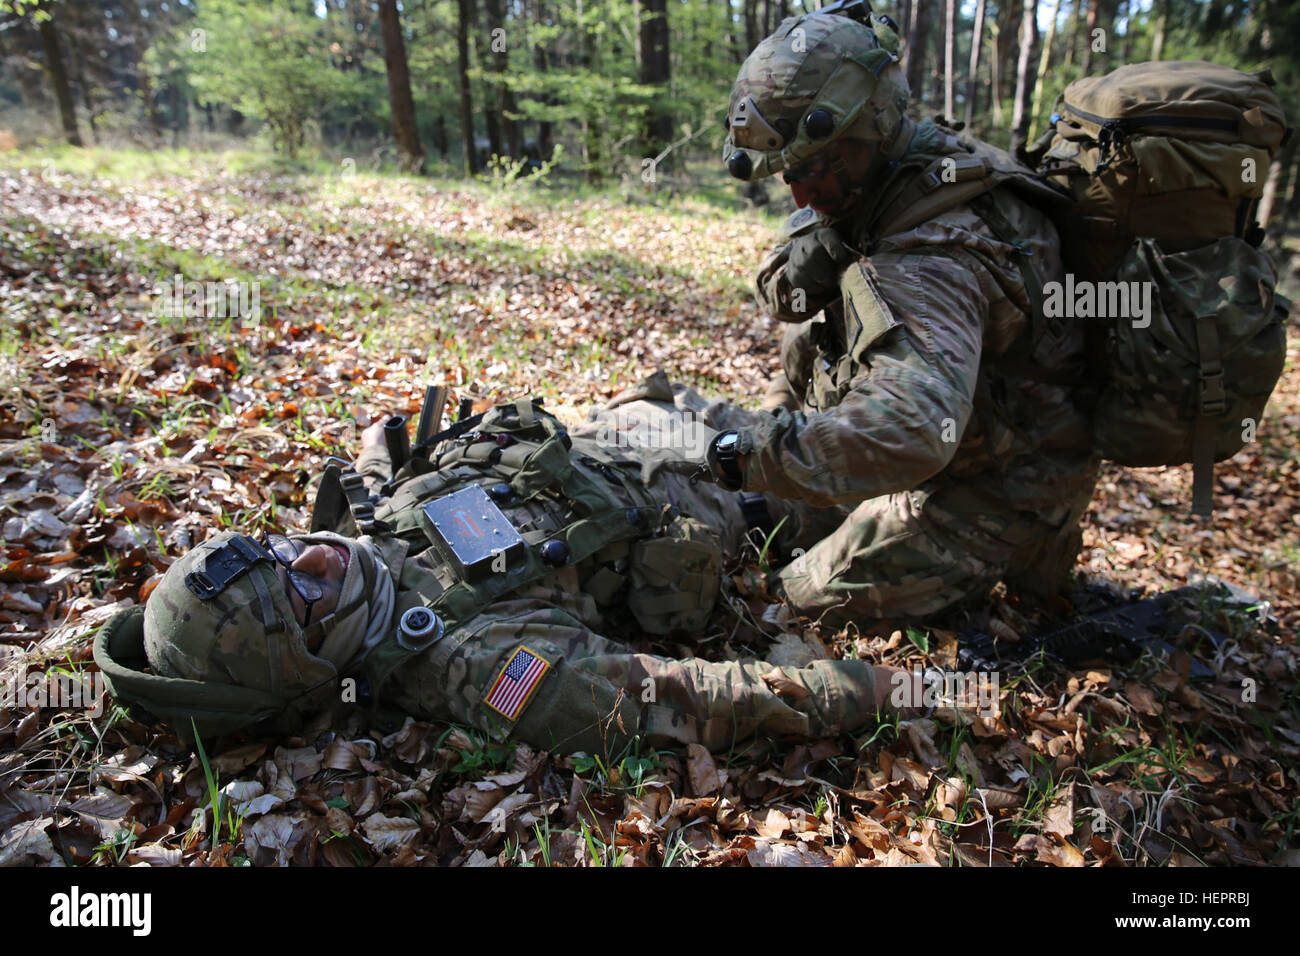 U.S. Army Sgt. Felipe Ornelas, right, of 1st Battalion, 503rd Airborne Infantry Regiment, 173rd Airborne Brigade performs medical assistance on a simulated casualty while conducting defense operations during exercise Saber Junction 16 at the U.S. Army’s Joint Multinational Readiness Center (JMRC) in Hohenfels, Germany, April 19, 2016. Saber Junction 16 is the U.S. Army Europe’s 173rd Airborne Brigade’s combat training center certification exercise, taking place at the JMRC in Hohenfels, Germany, Mar. 31-Apr. 24, 2016.  The exercise is designed to evaluate the readiness of the Army’s Europe-bas Stock Photo